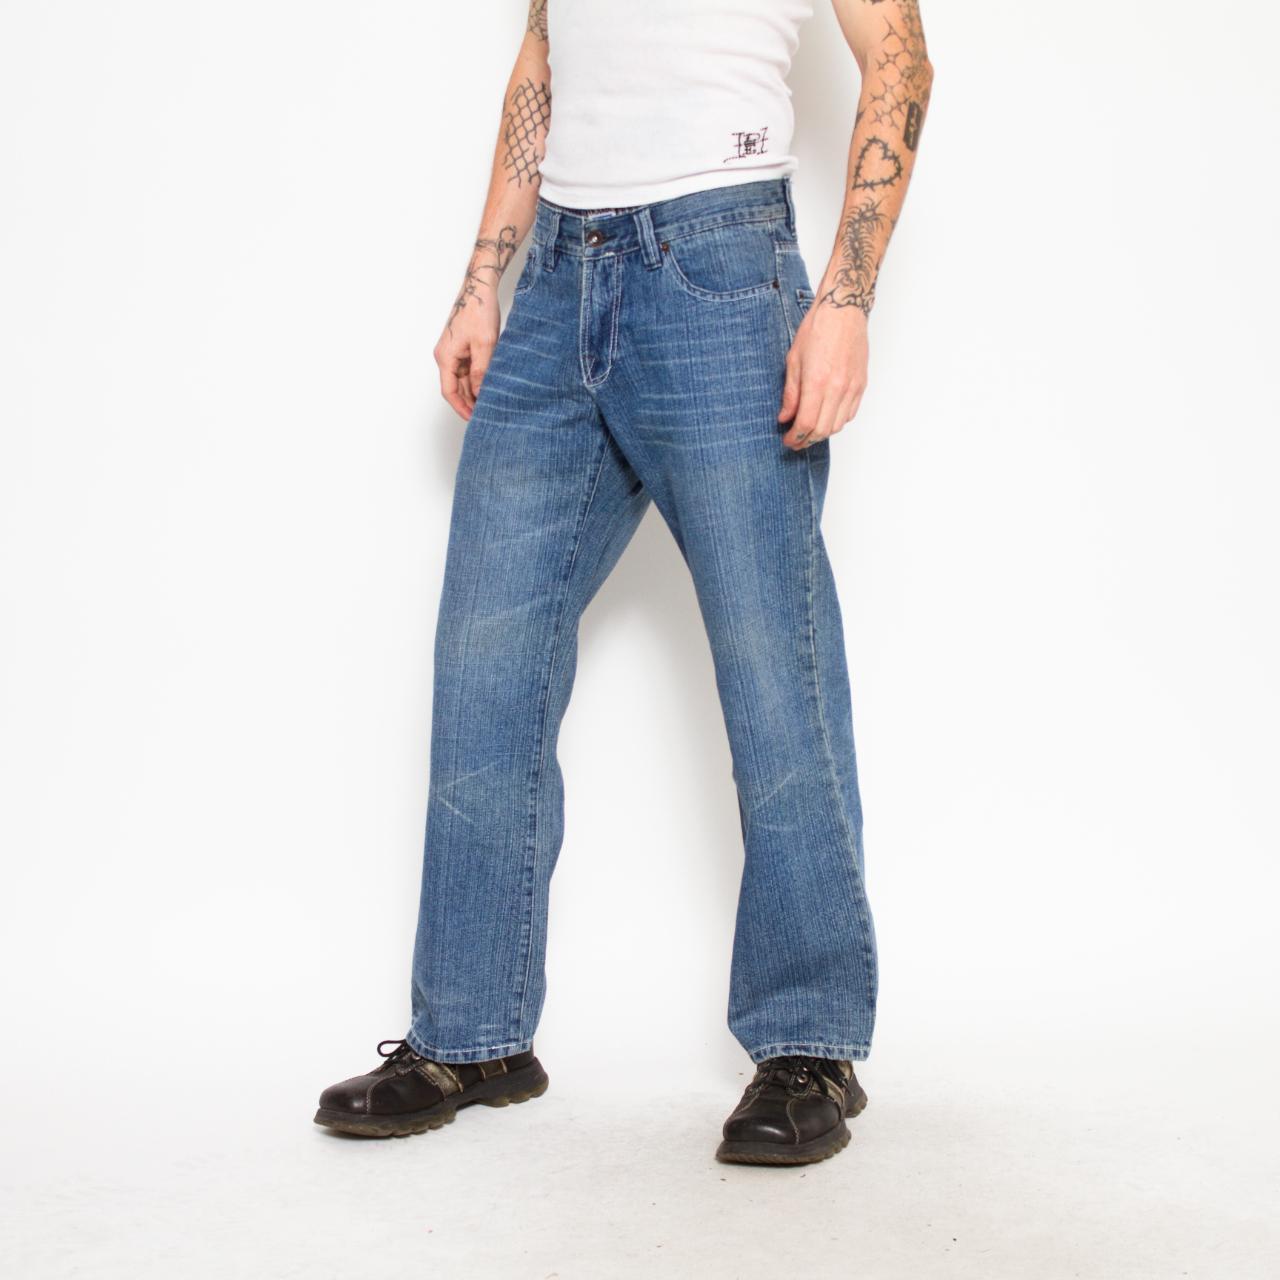 Cultura Men's Blue and Navy Jeans